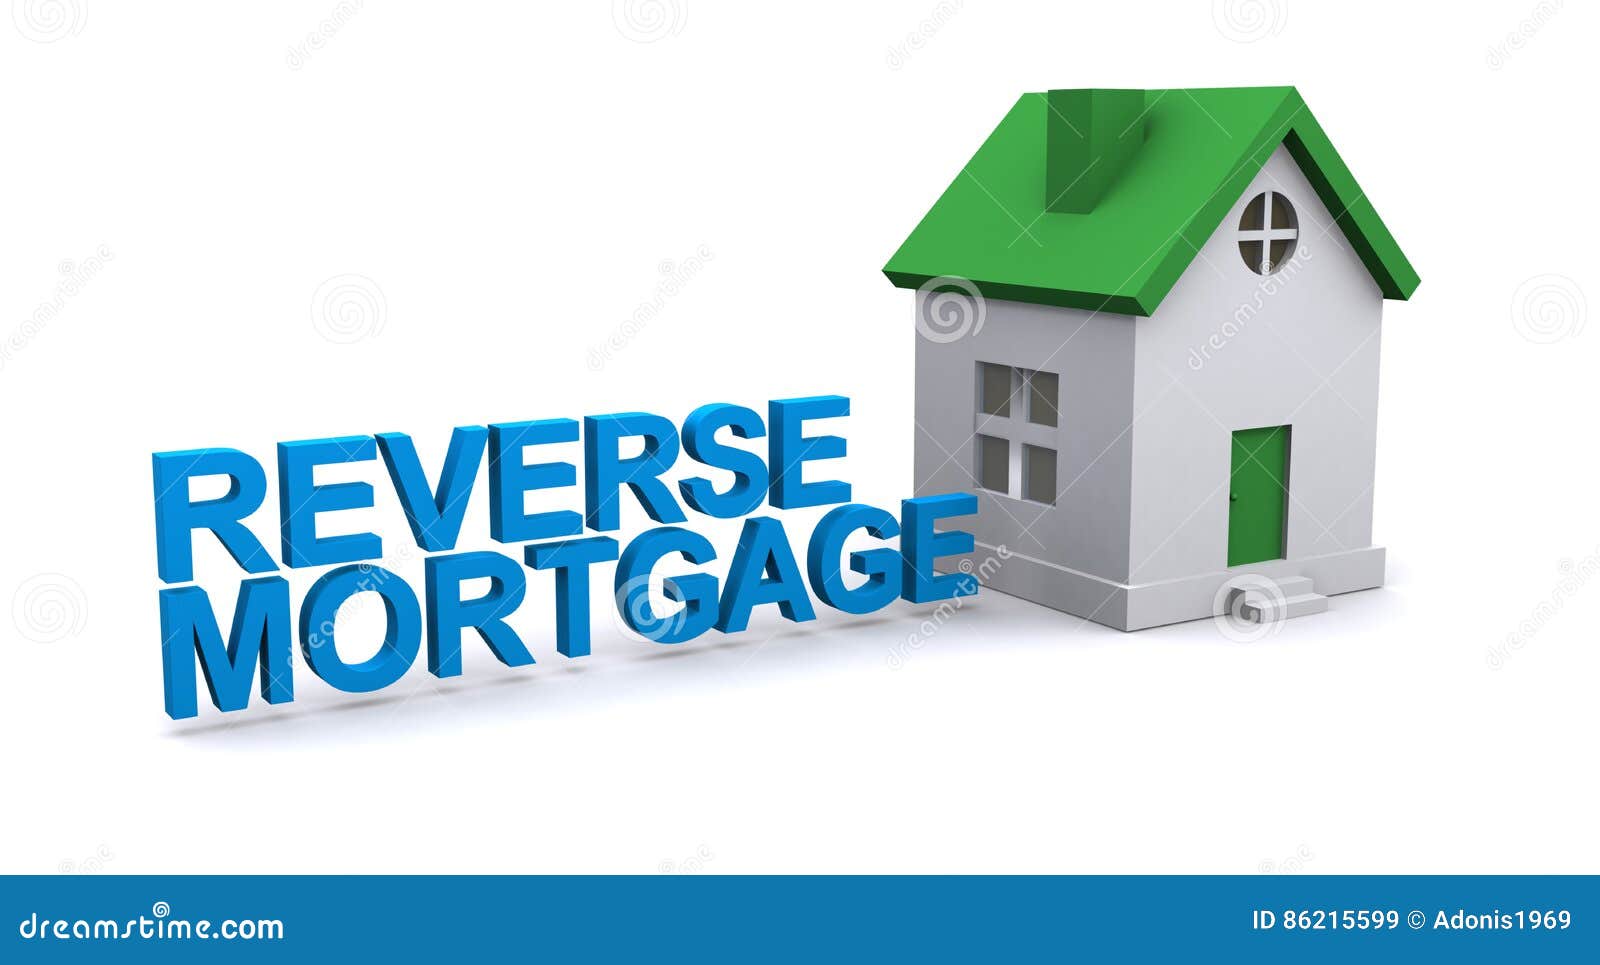 reverse mortgage sign